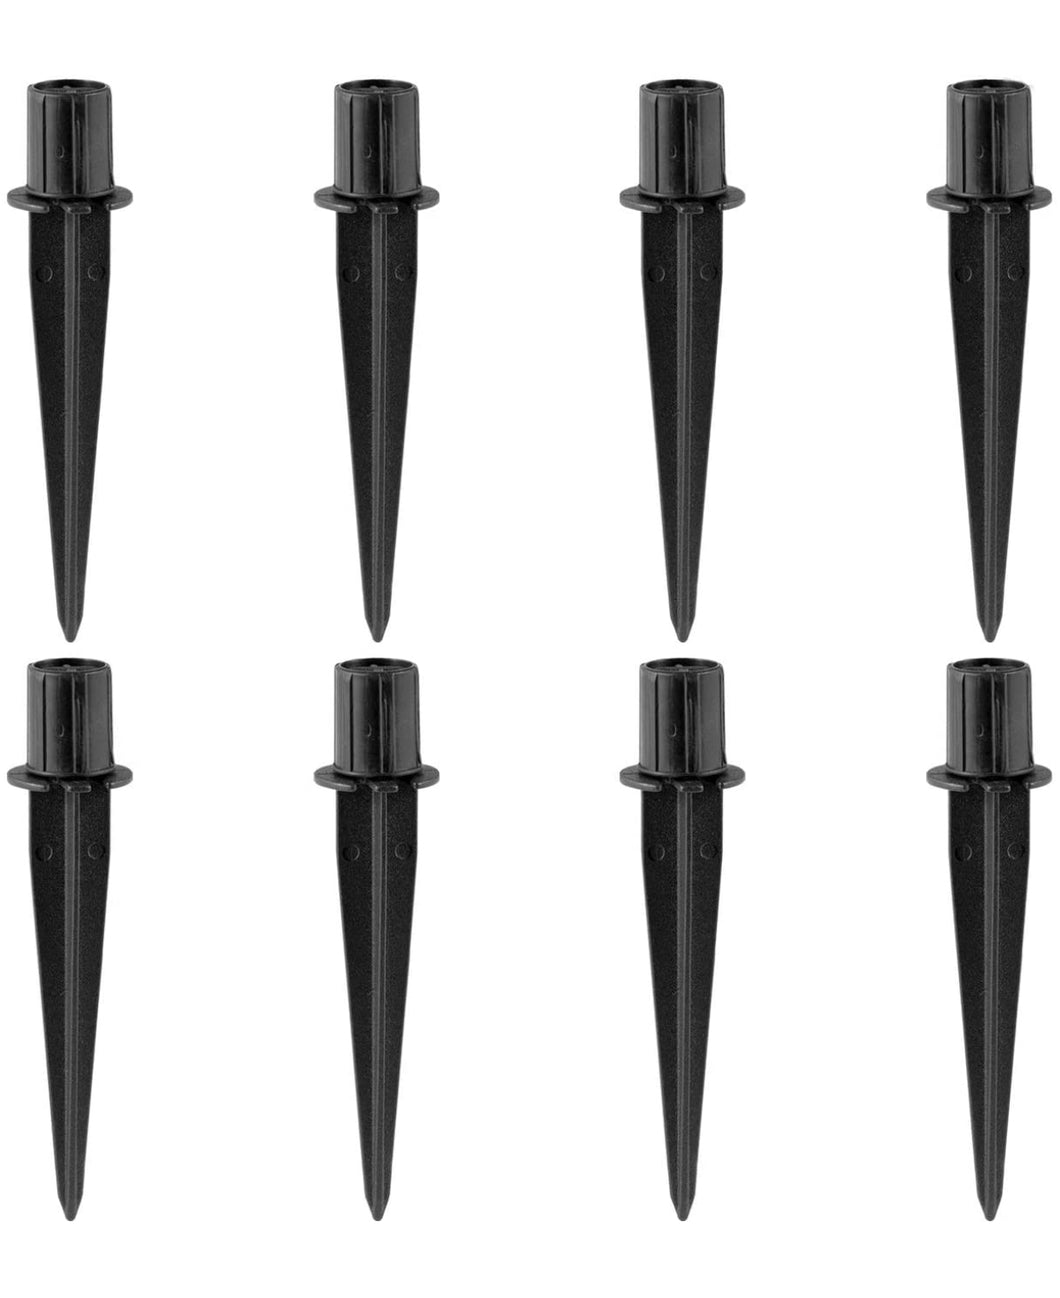 10x Path Light Replacement Stakes Ground Solar Light Spikes for Garden Lamps